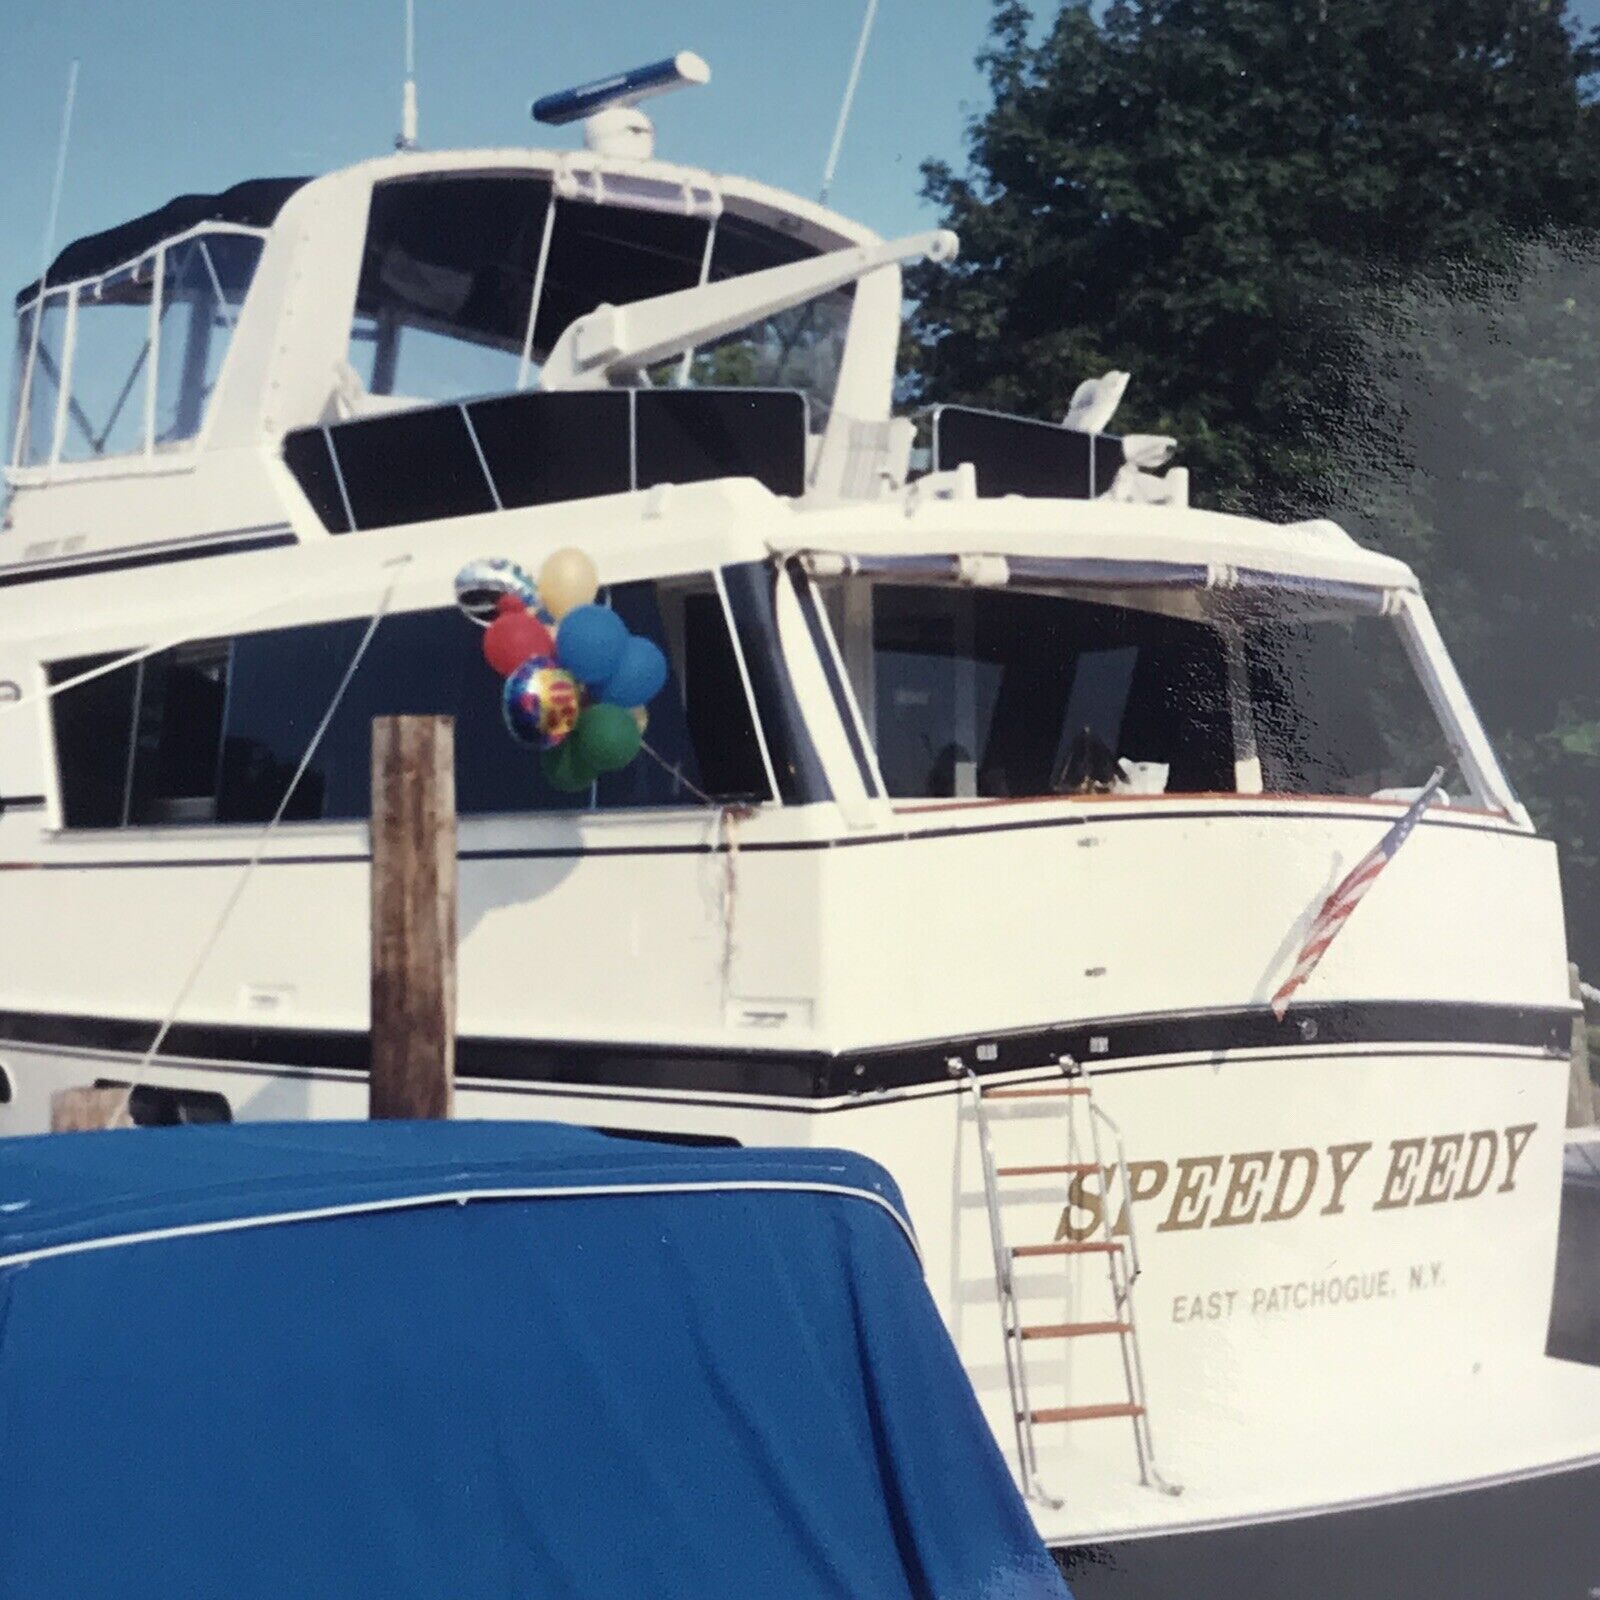 Vintage Color Photo Speedy Eedy Boat Yacht Docked East Patchogue New York